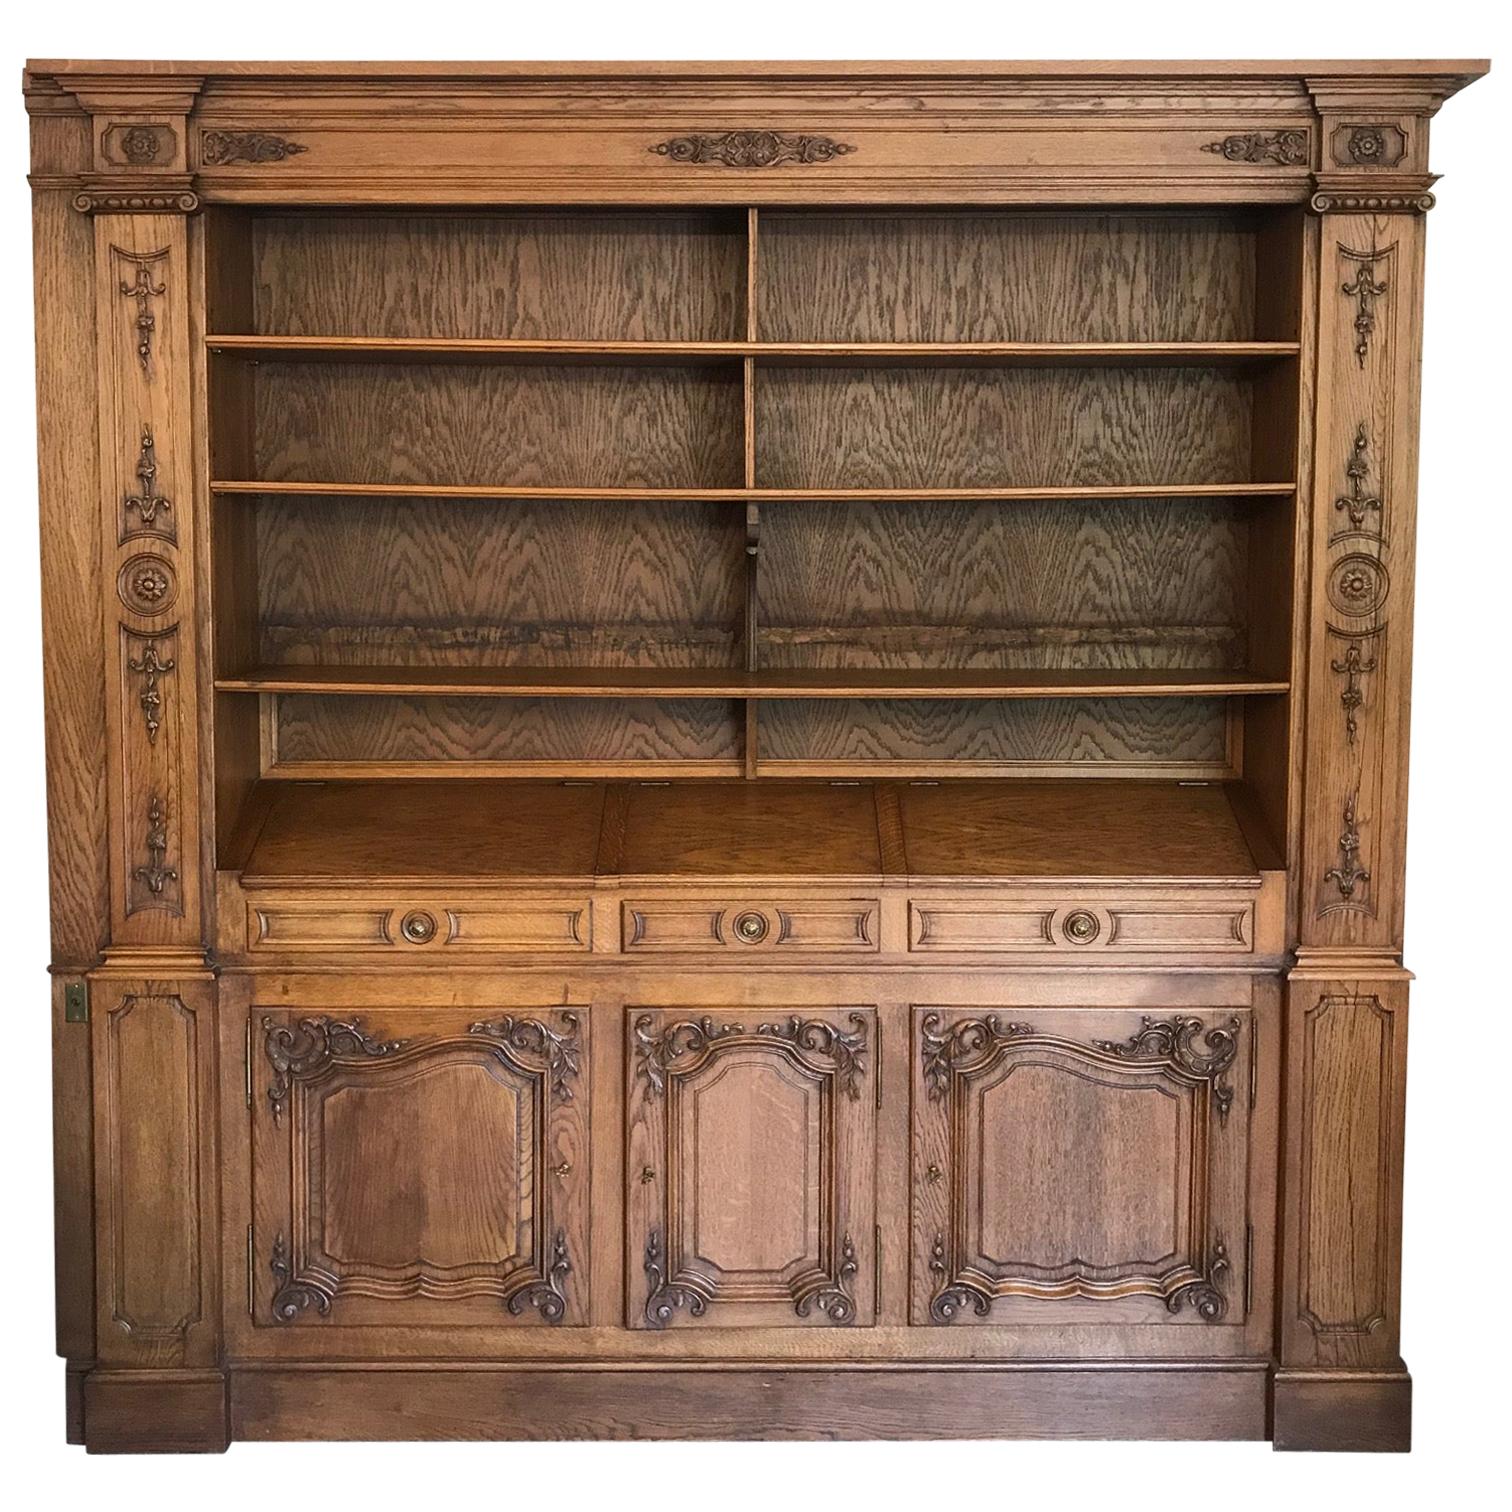 20th Century French Oak Bibliotheque Cabinet, 1920s